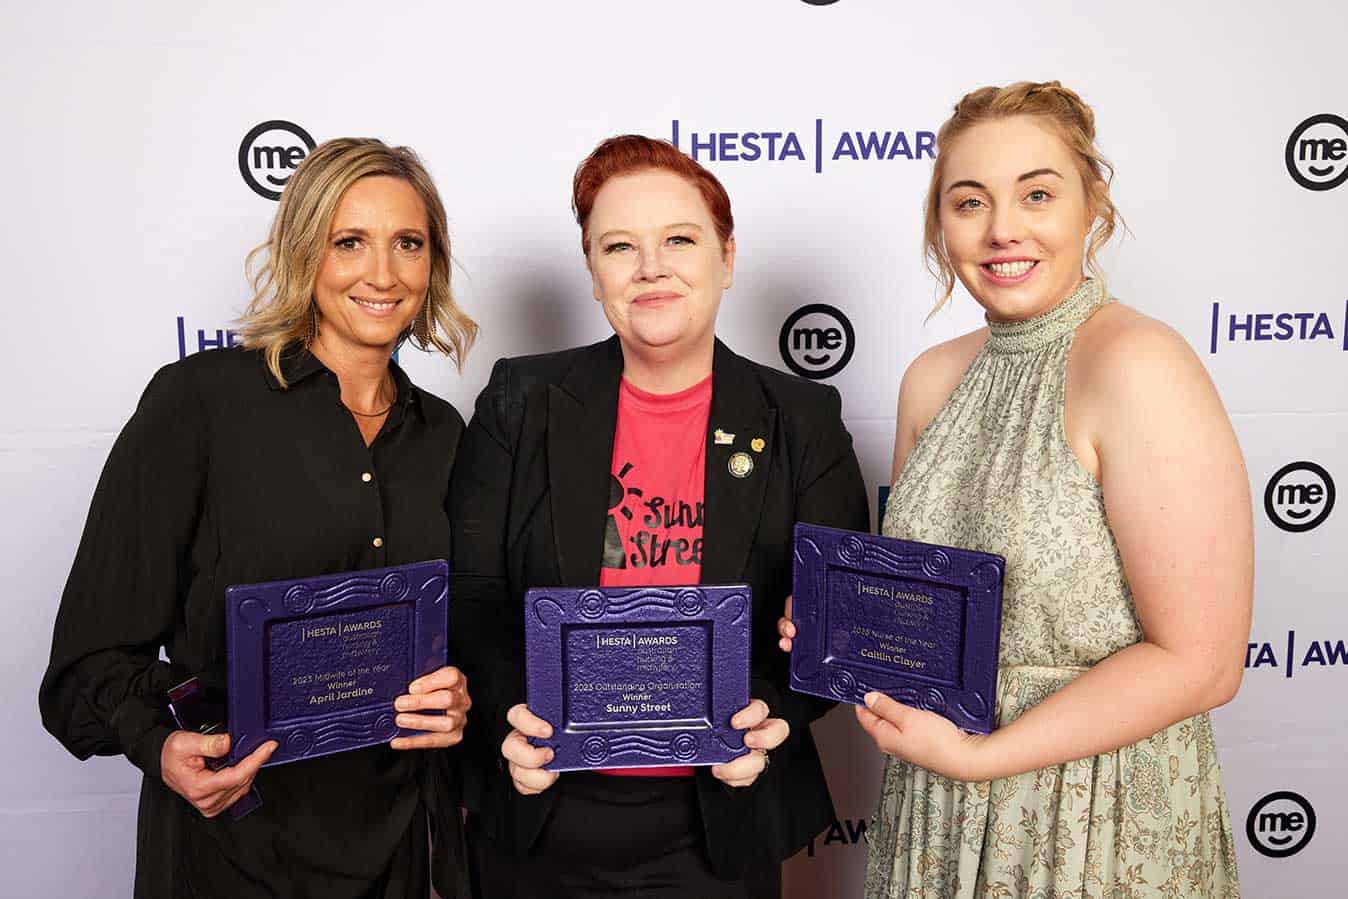 Left to right, April Jardine, Midwife of the Year, Sonia Martin from Sunny Street, and Caitlin Clayer, Nurse of the Year.